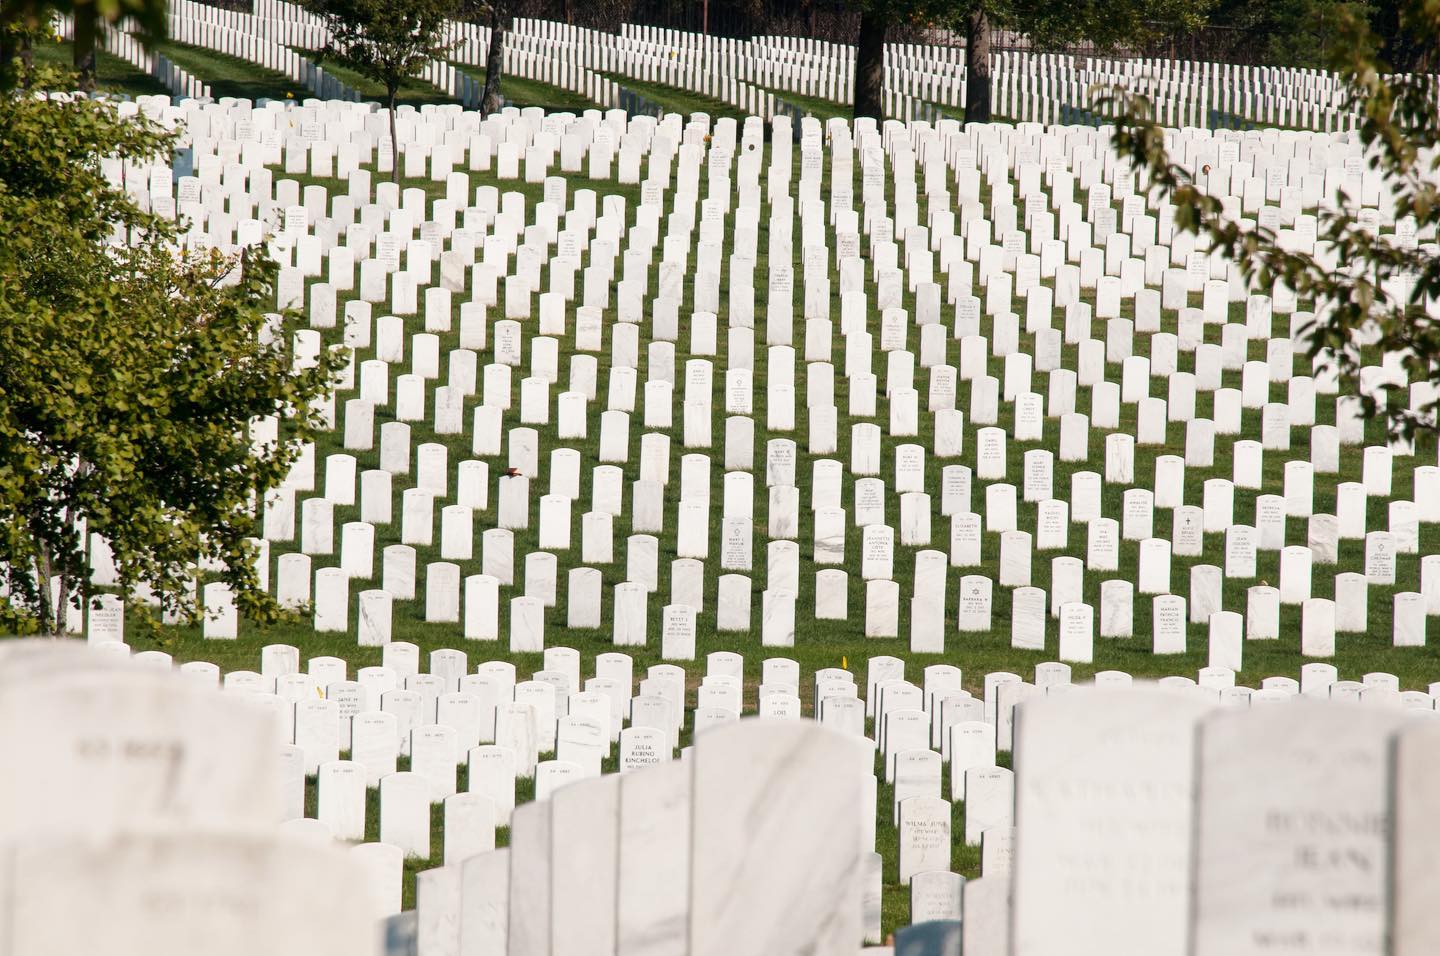 Approximately 400,000 veterans and their eligible dependents are buried at Arlington National Cemetery. Service members from every one of America’s major wars, from the Revolutionary War to today's conflicts, are interred at ANC. 

As a result, the history of our nation is reflected on the grounds of the cemetery.